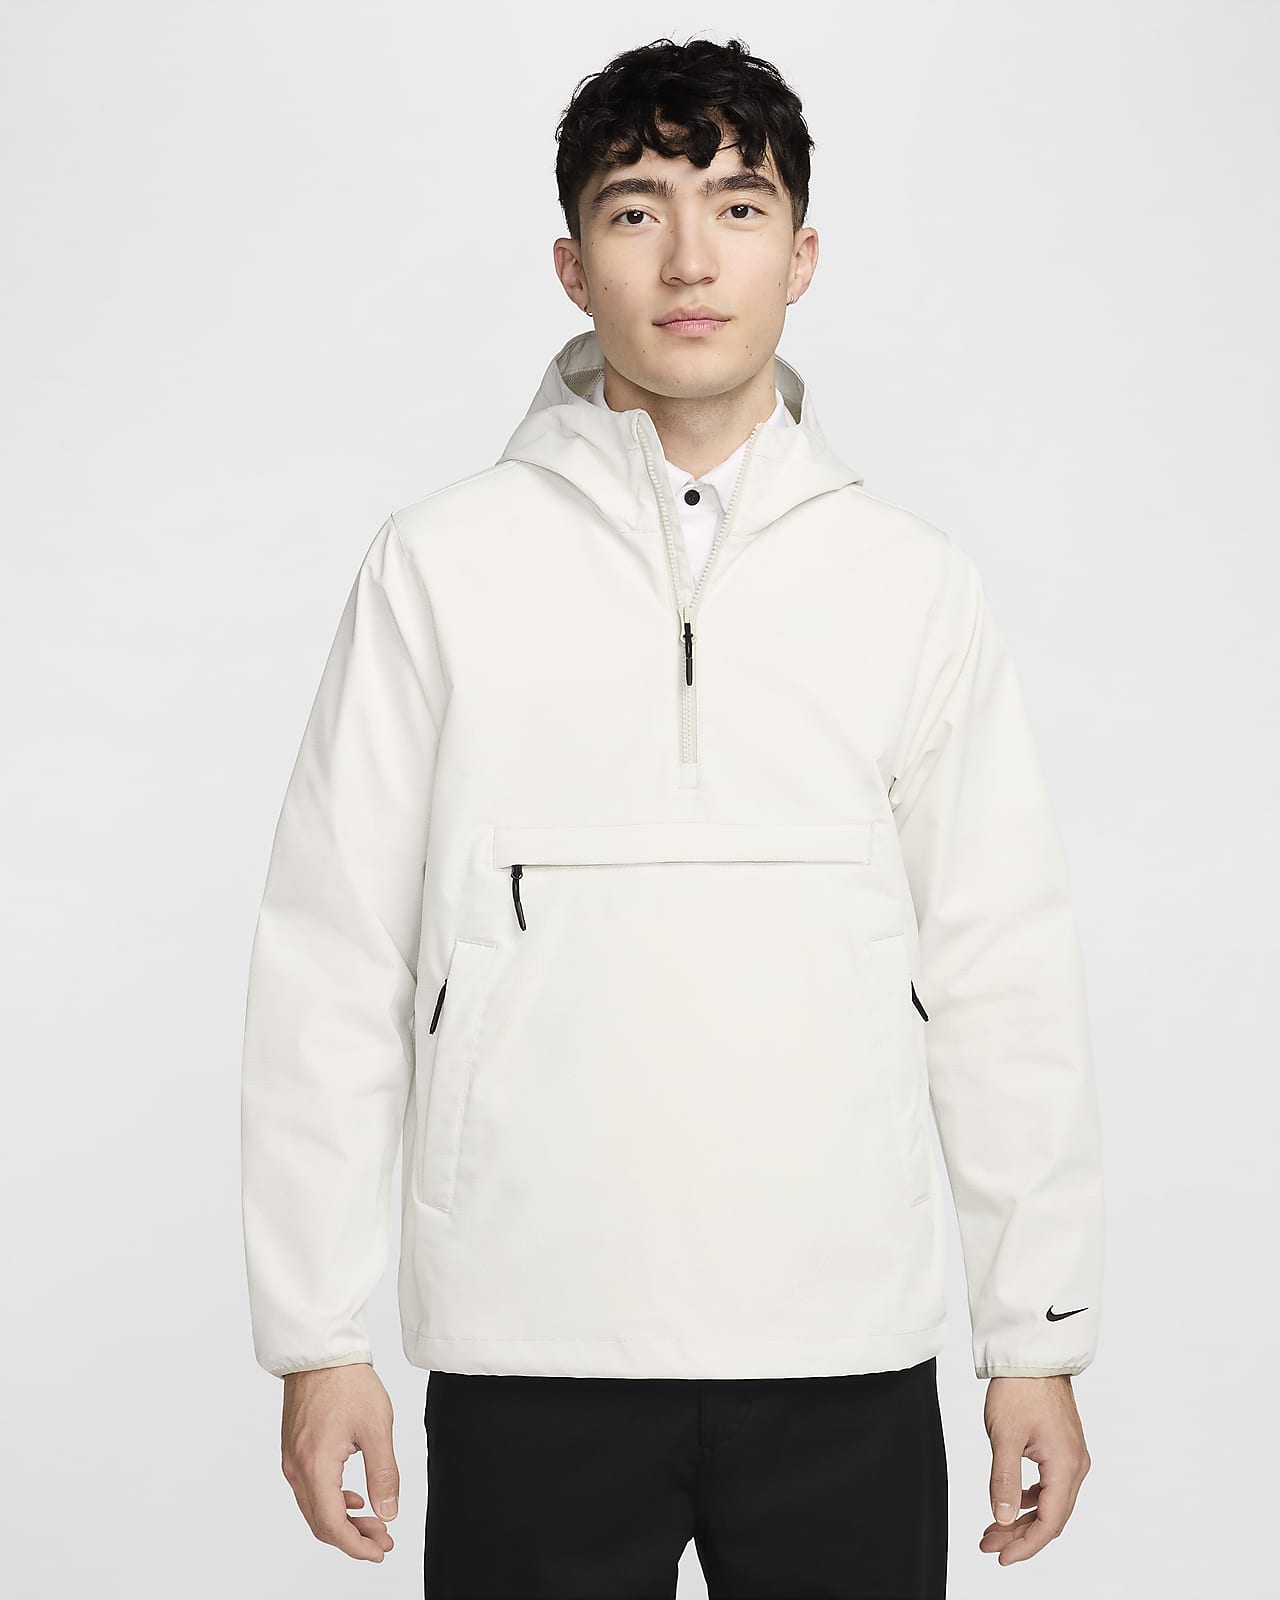 Nike Unscripted Repel Men's Golf Anorak Jacket